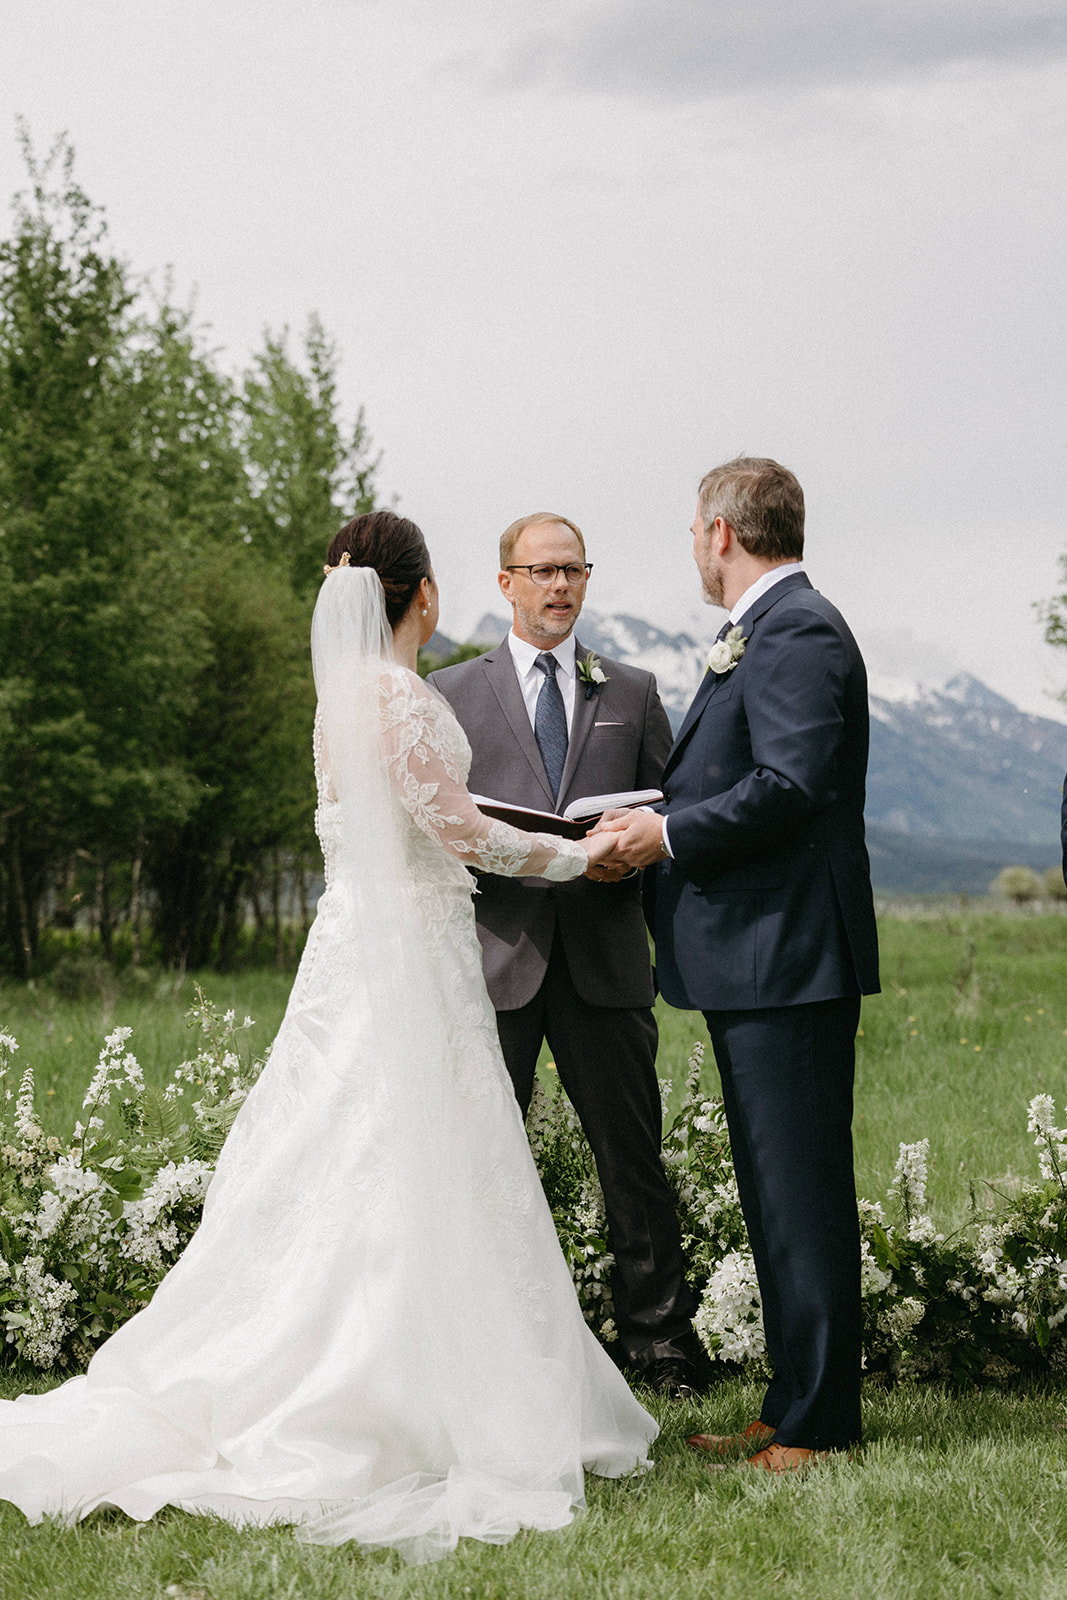 A bride in a long-sleeve, white lace wedding gown exchanges vows with a groom in a custom tailored black suit. 